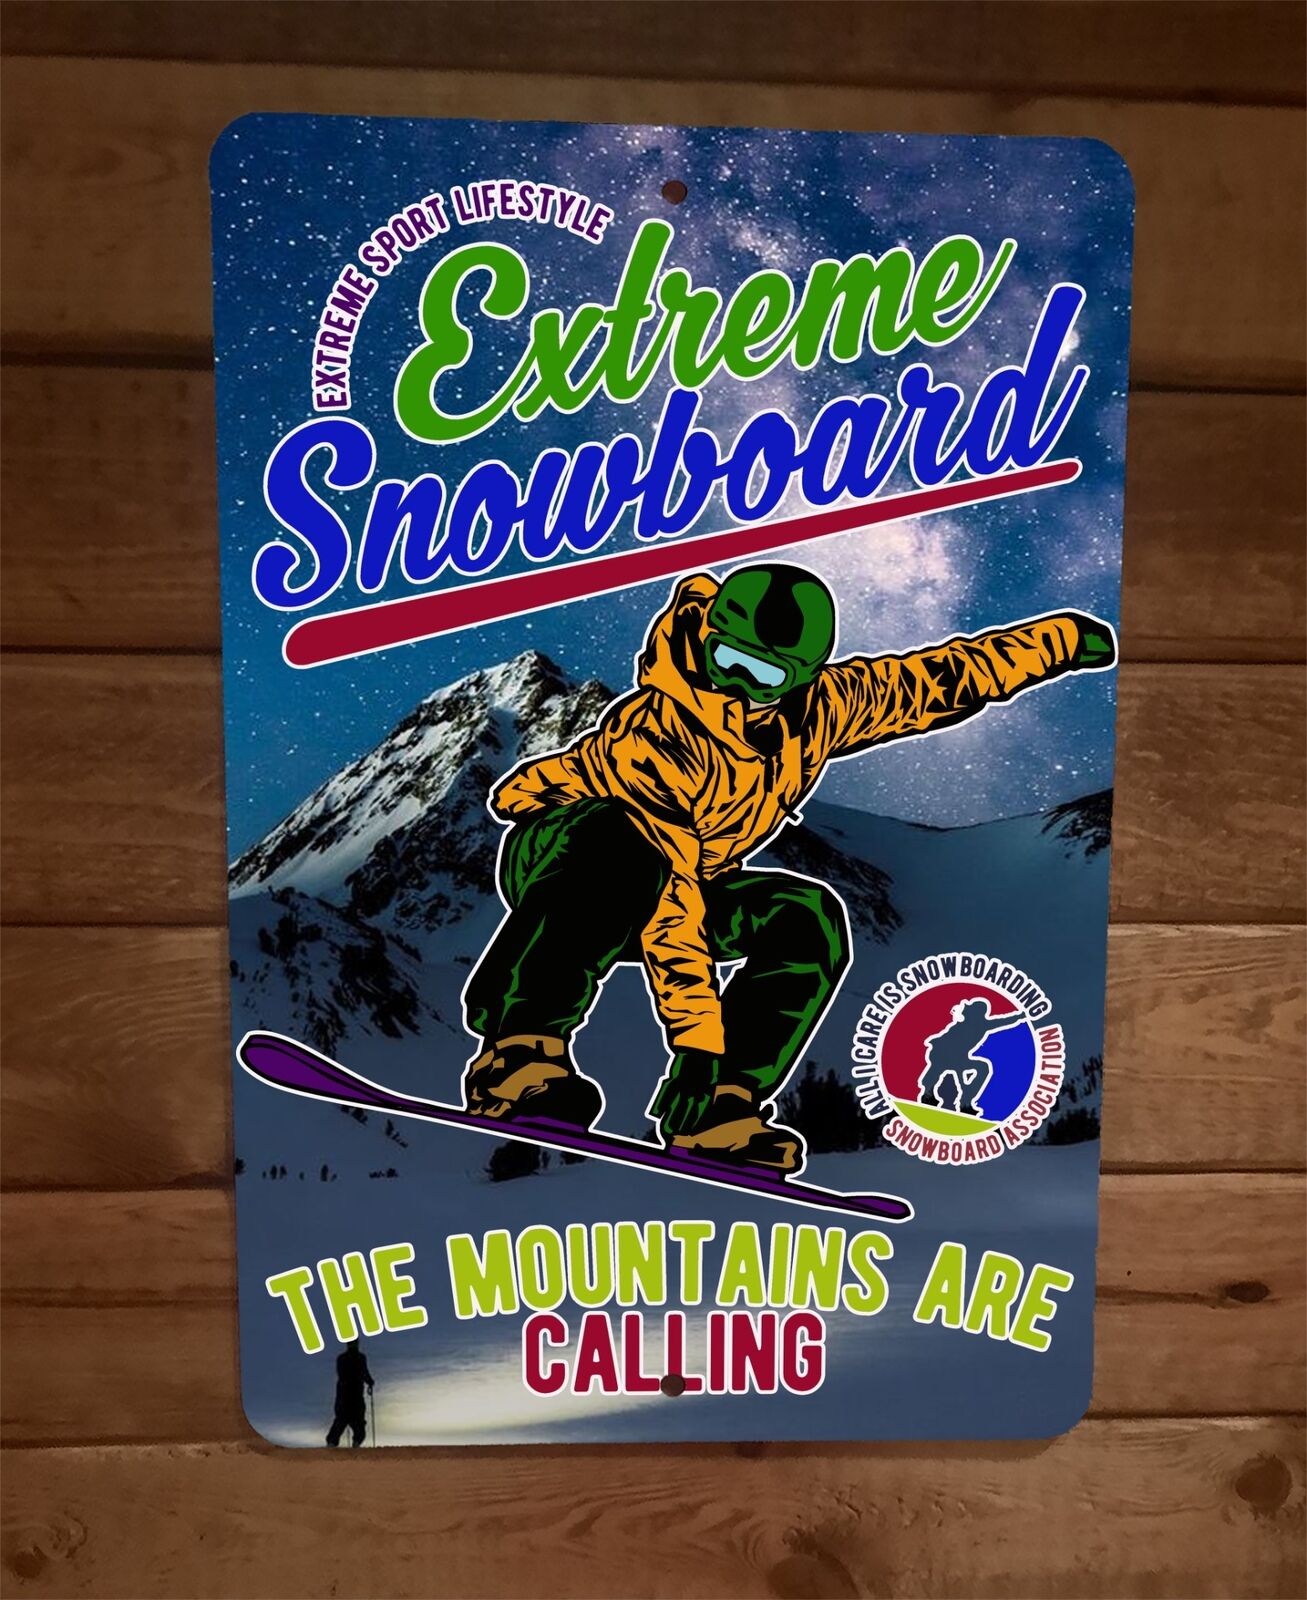 Extreme Snowboard the Mountains are Calling Sports 8x12 Metal Wall Sign